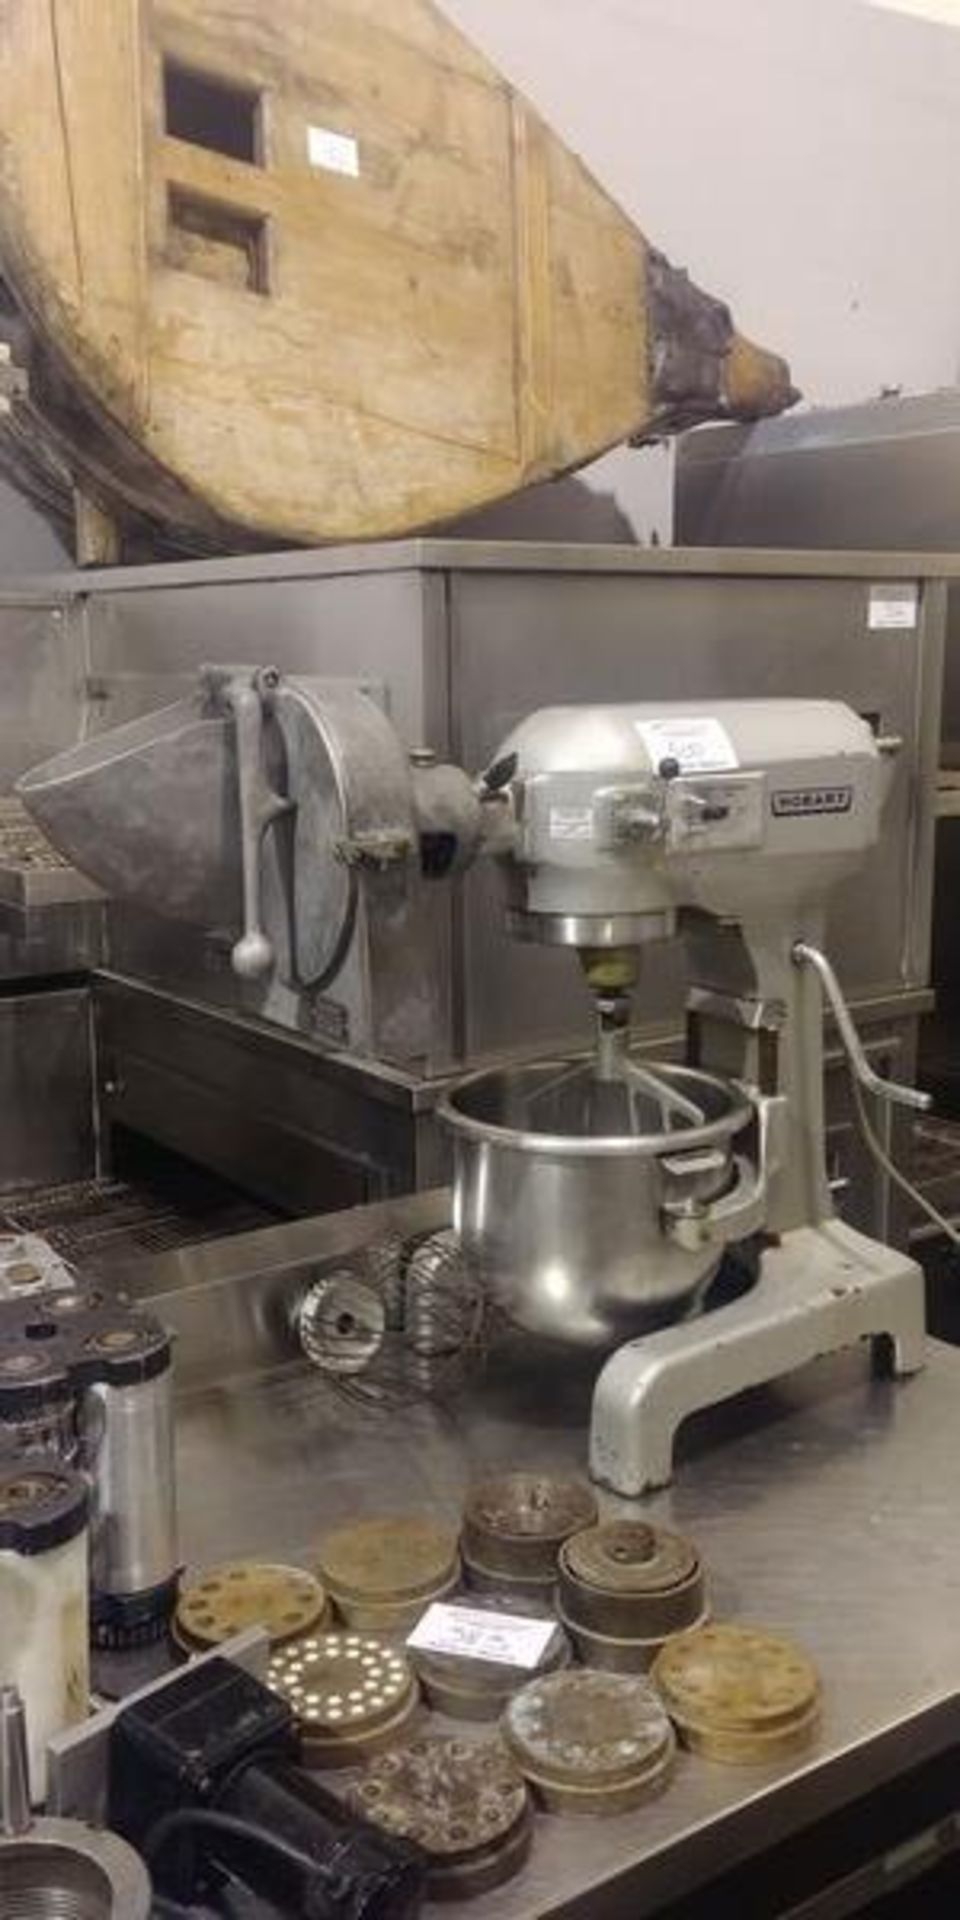 Hobart A120 Mixer - Complete with 2 Attachments and Cheese Shredder